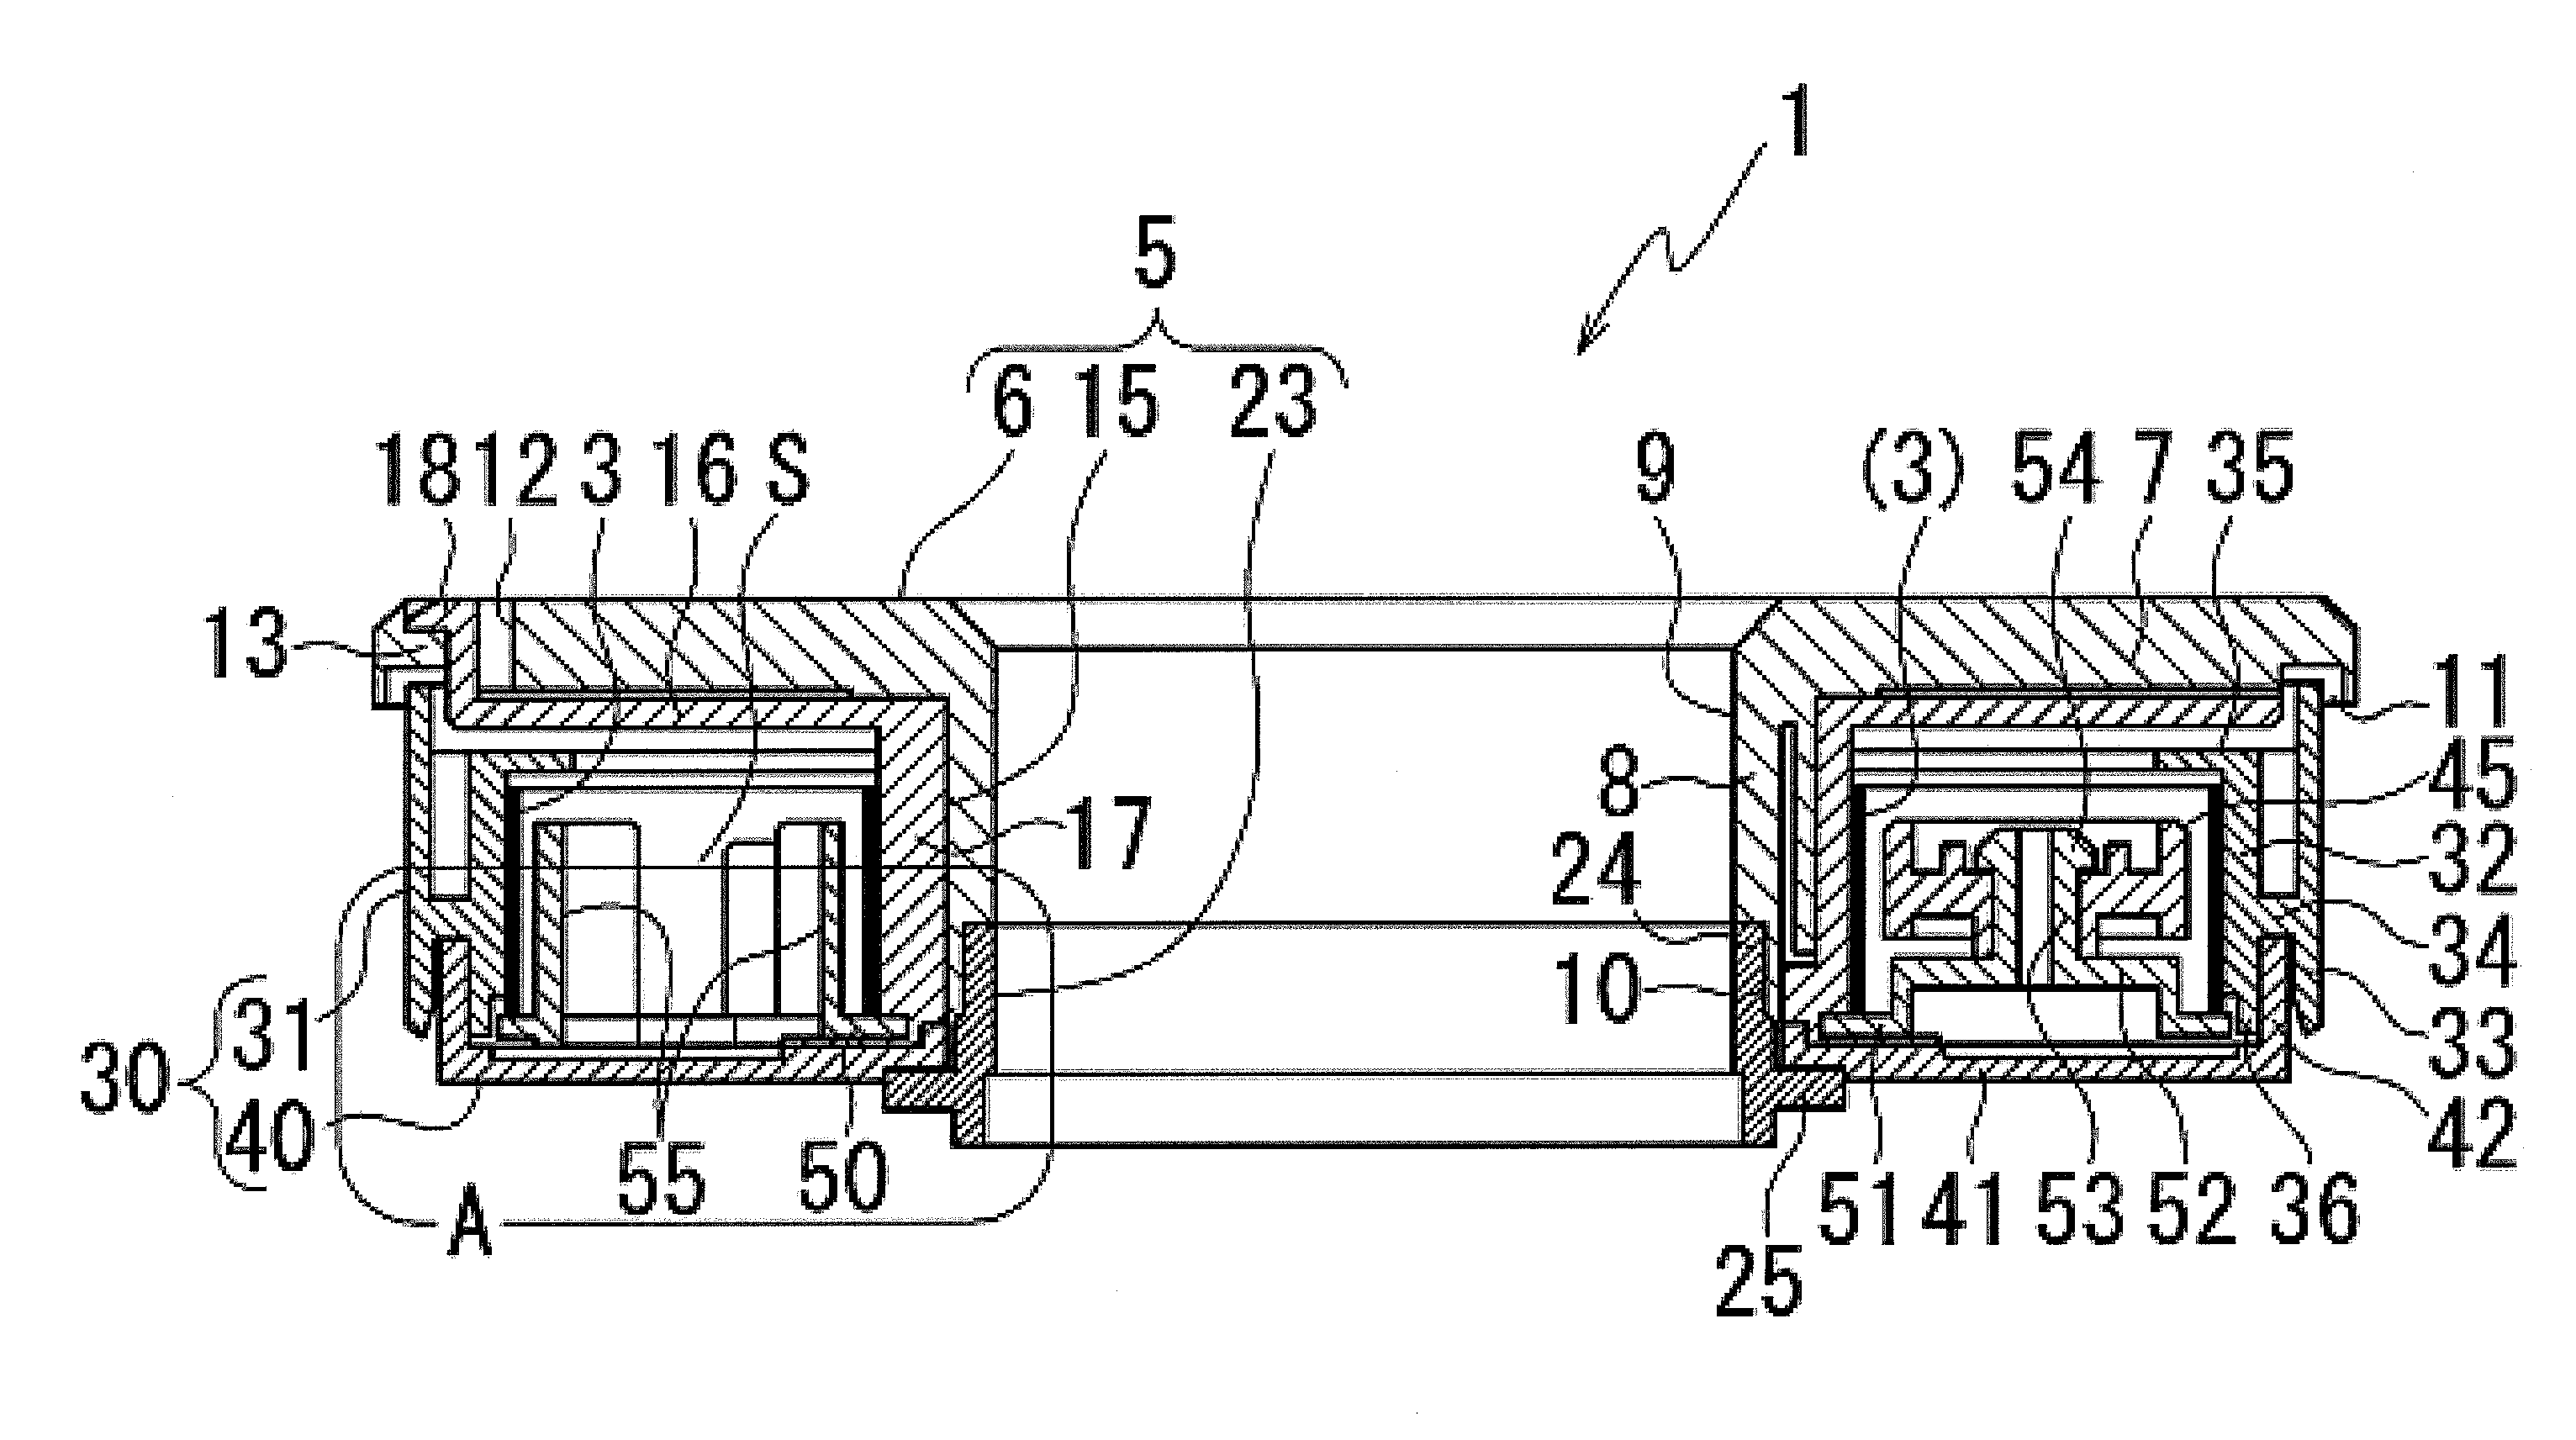 Rotational connector device